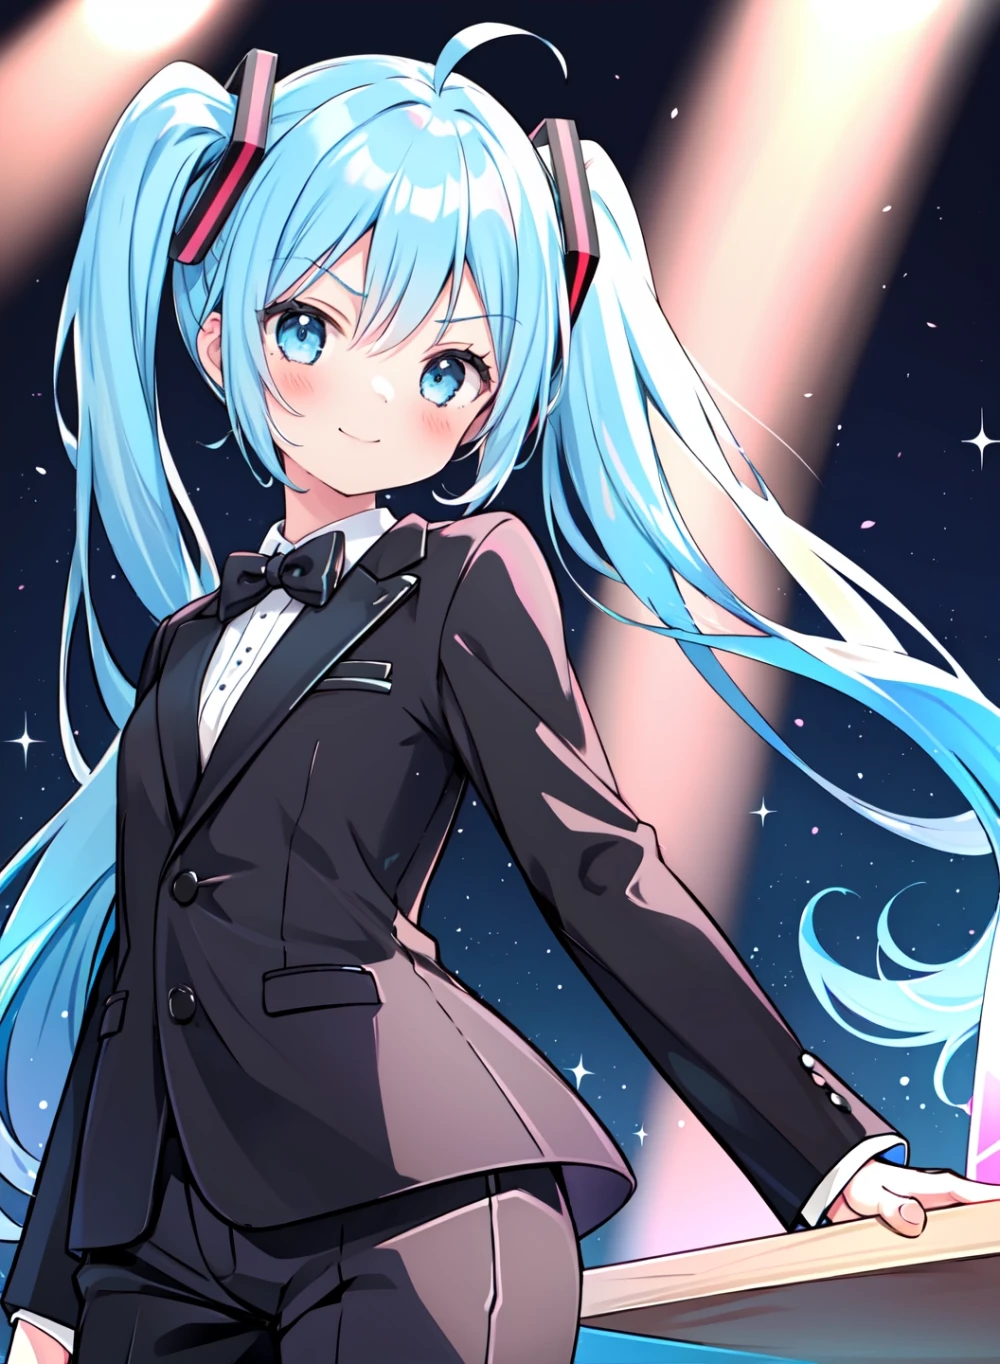 hatsune-miku-anime-style-all-ages-2-27